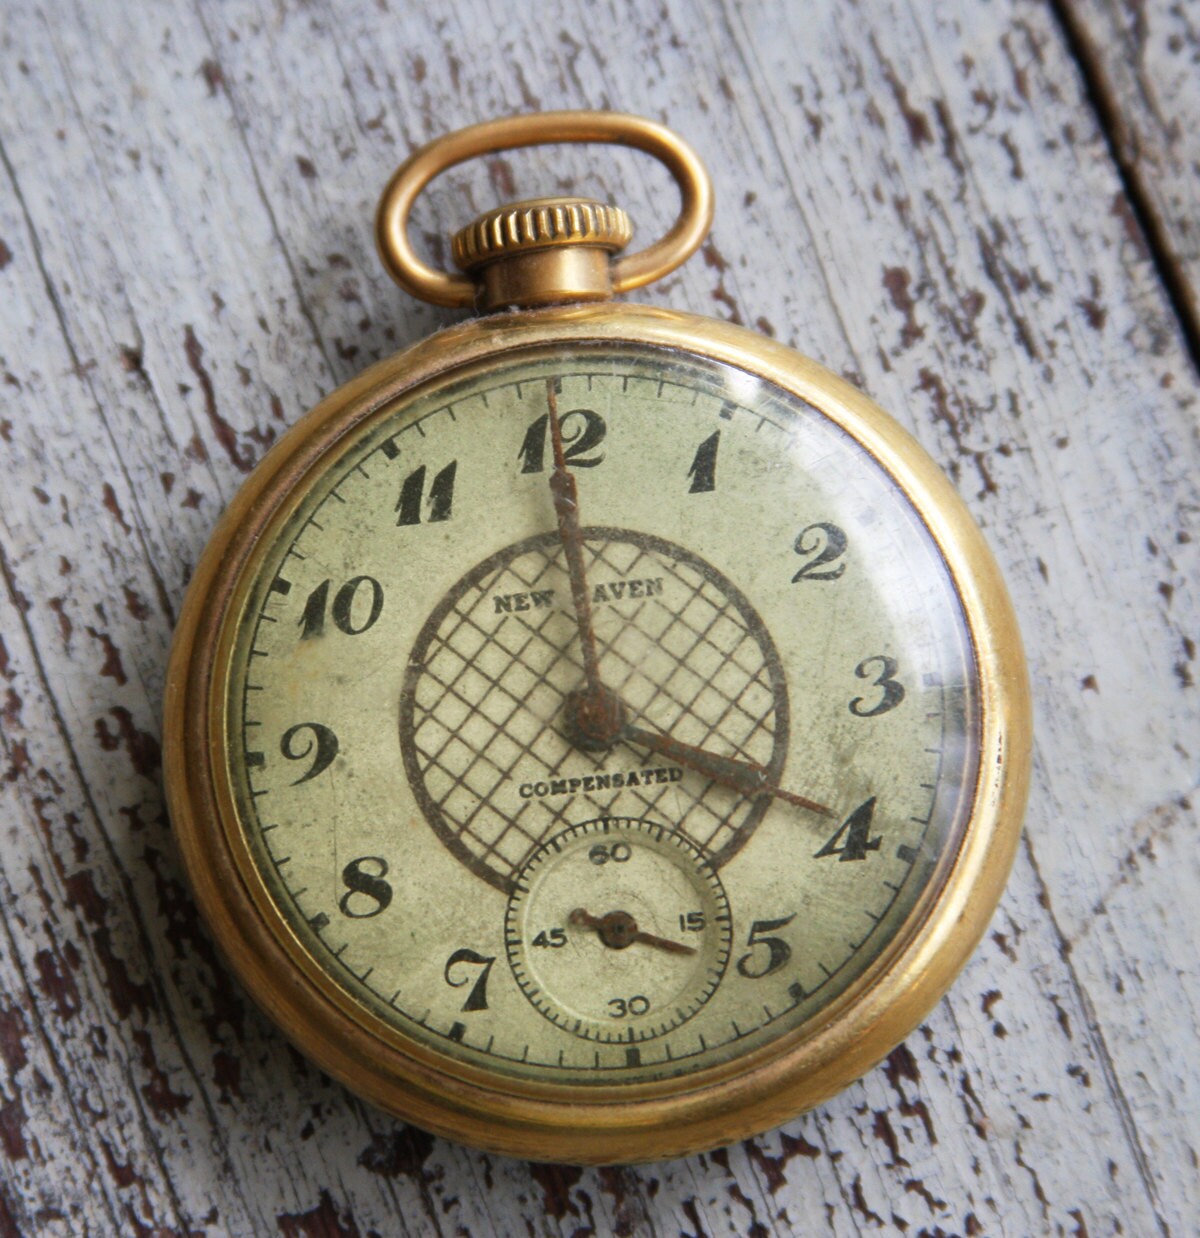 Vintage Pocket Watch NEW HAVEN Compensated Non-Working